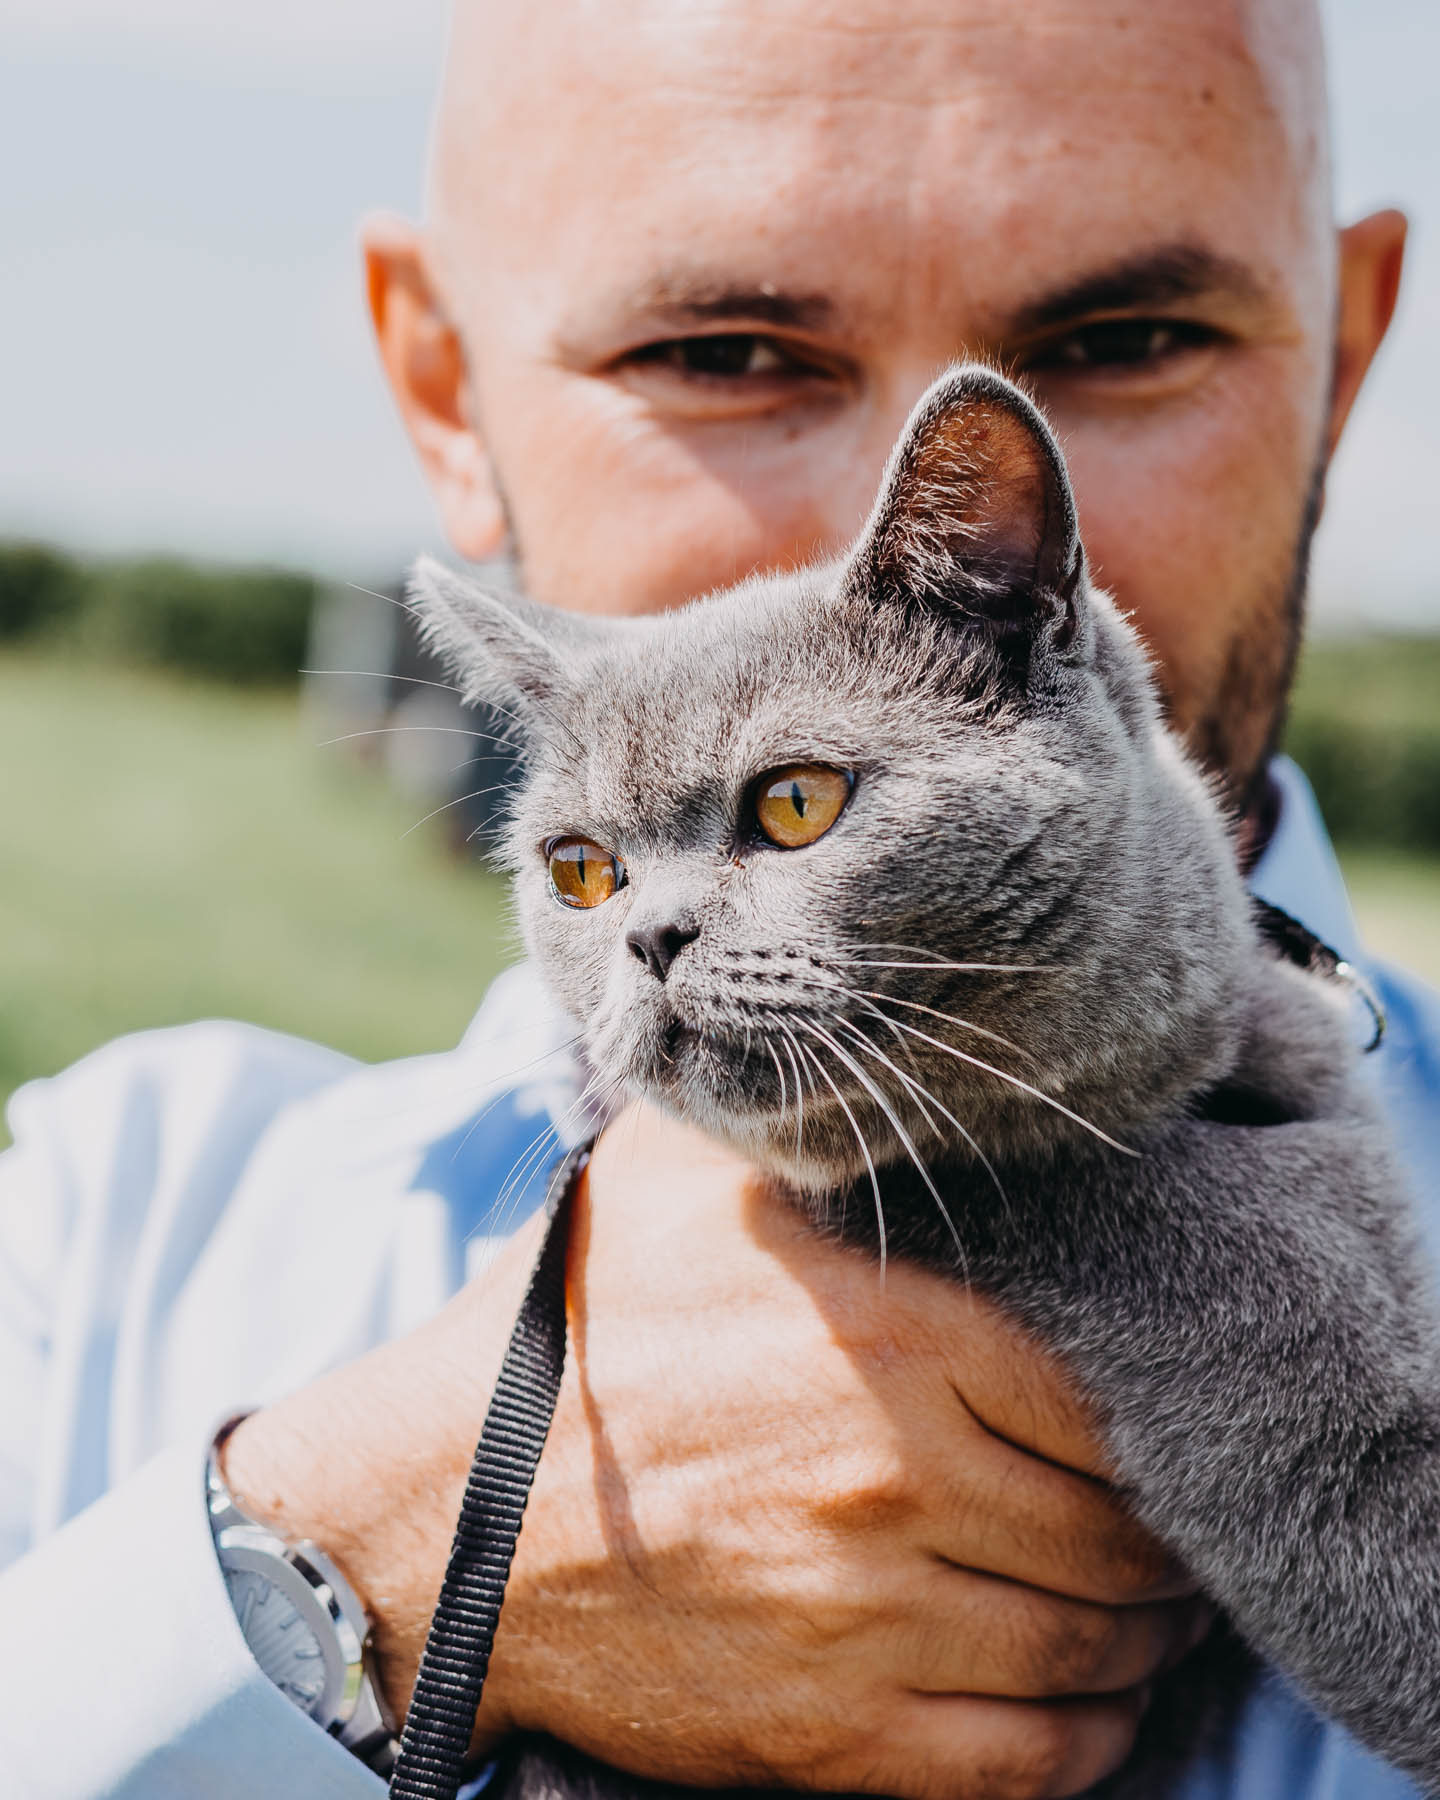 The groom with his cat